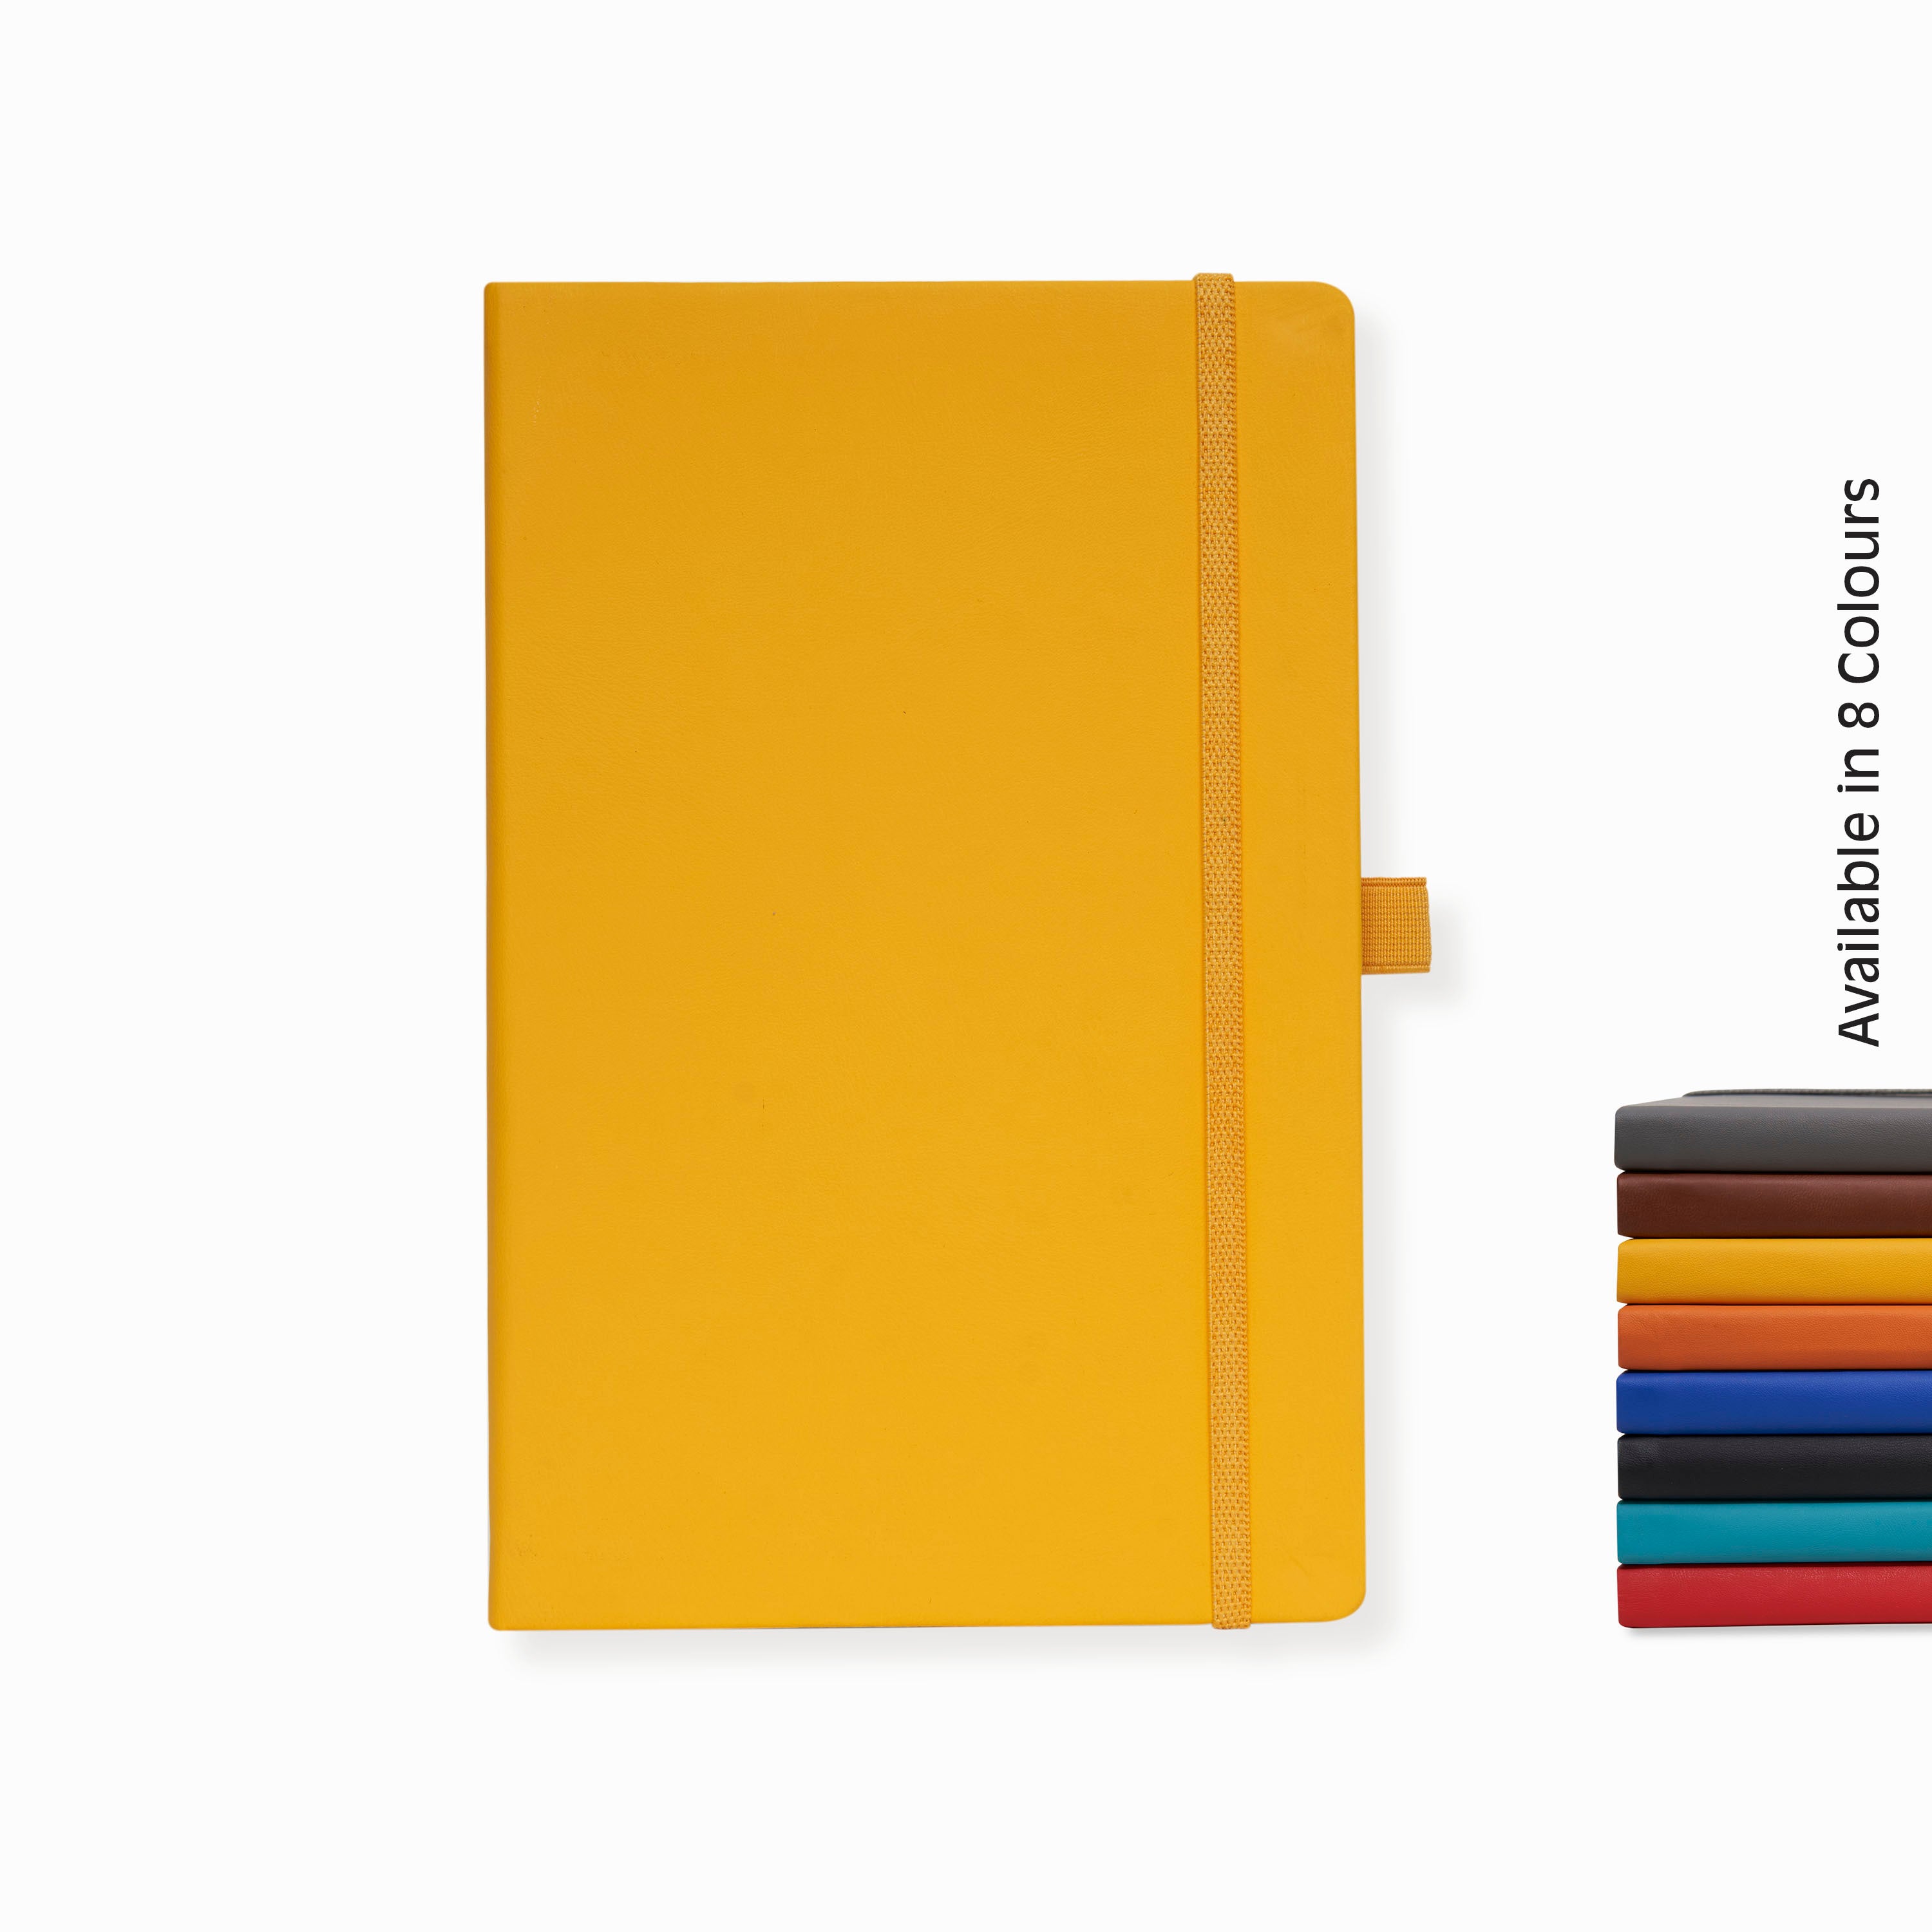 Doodle Pro Series Executive A5 PU Leather Hardbound Ruled Diary with Pen Loop - YELLOW